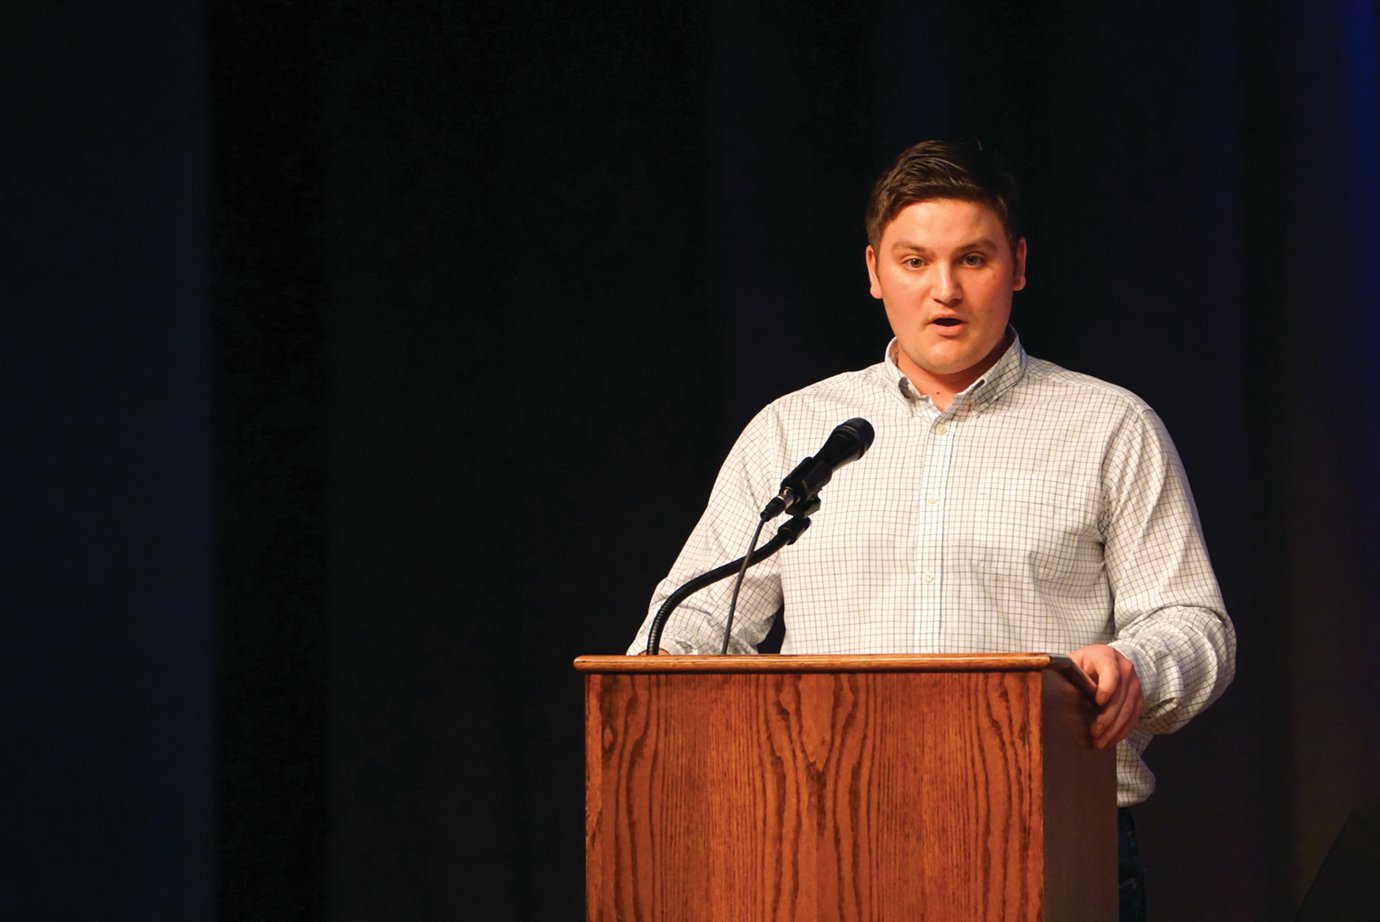 Crawfordsville firefighter Colton Meadows, keynote speaker at the Workforce Signing event Tuesday at North Montgomery, stresses the important of experience and passion to the next generation.